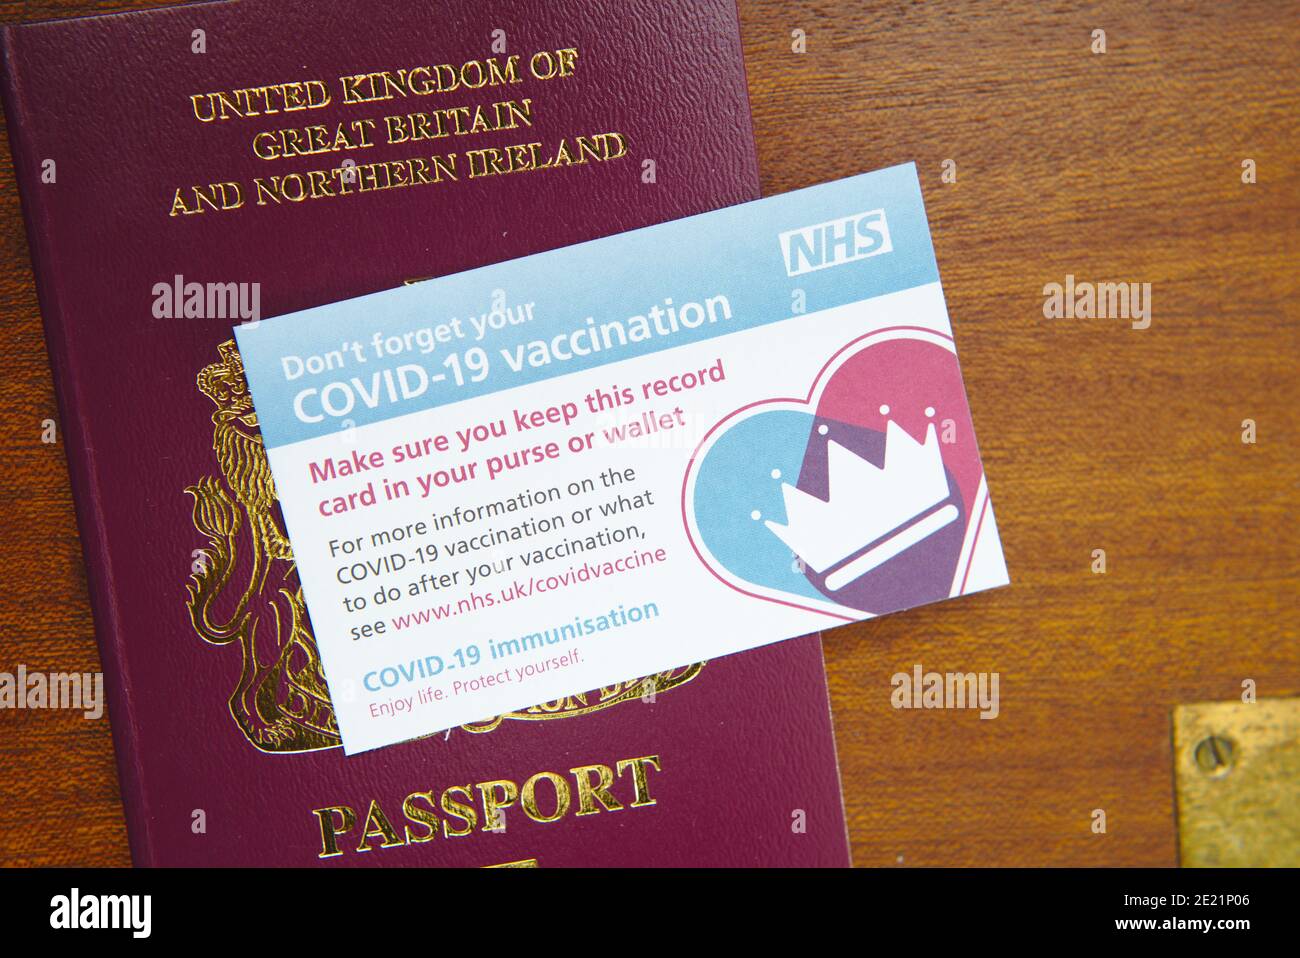 Covid 19 vaccination record card with British passport. A vaccination history and immunity may make travel easier post pandemic. Stock Photo